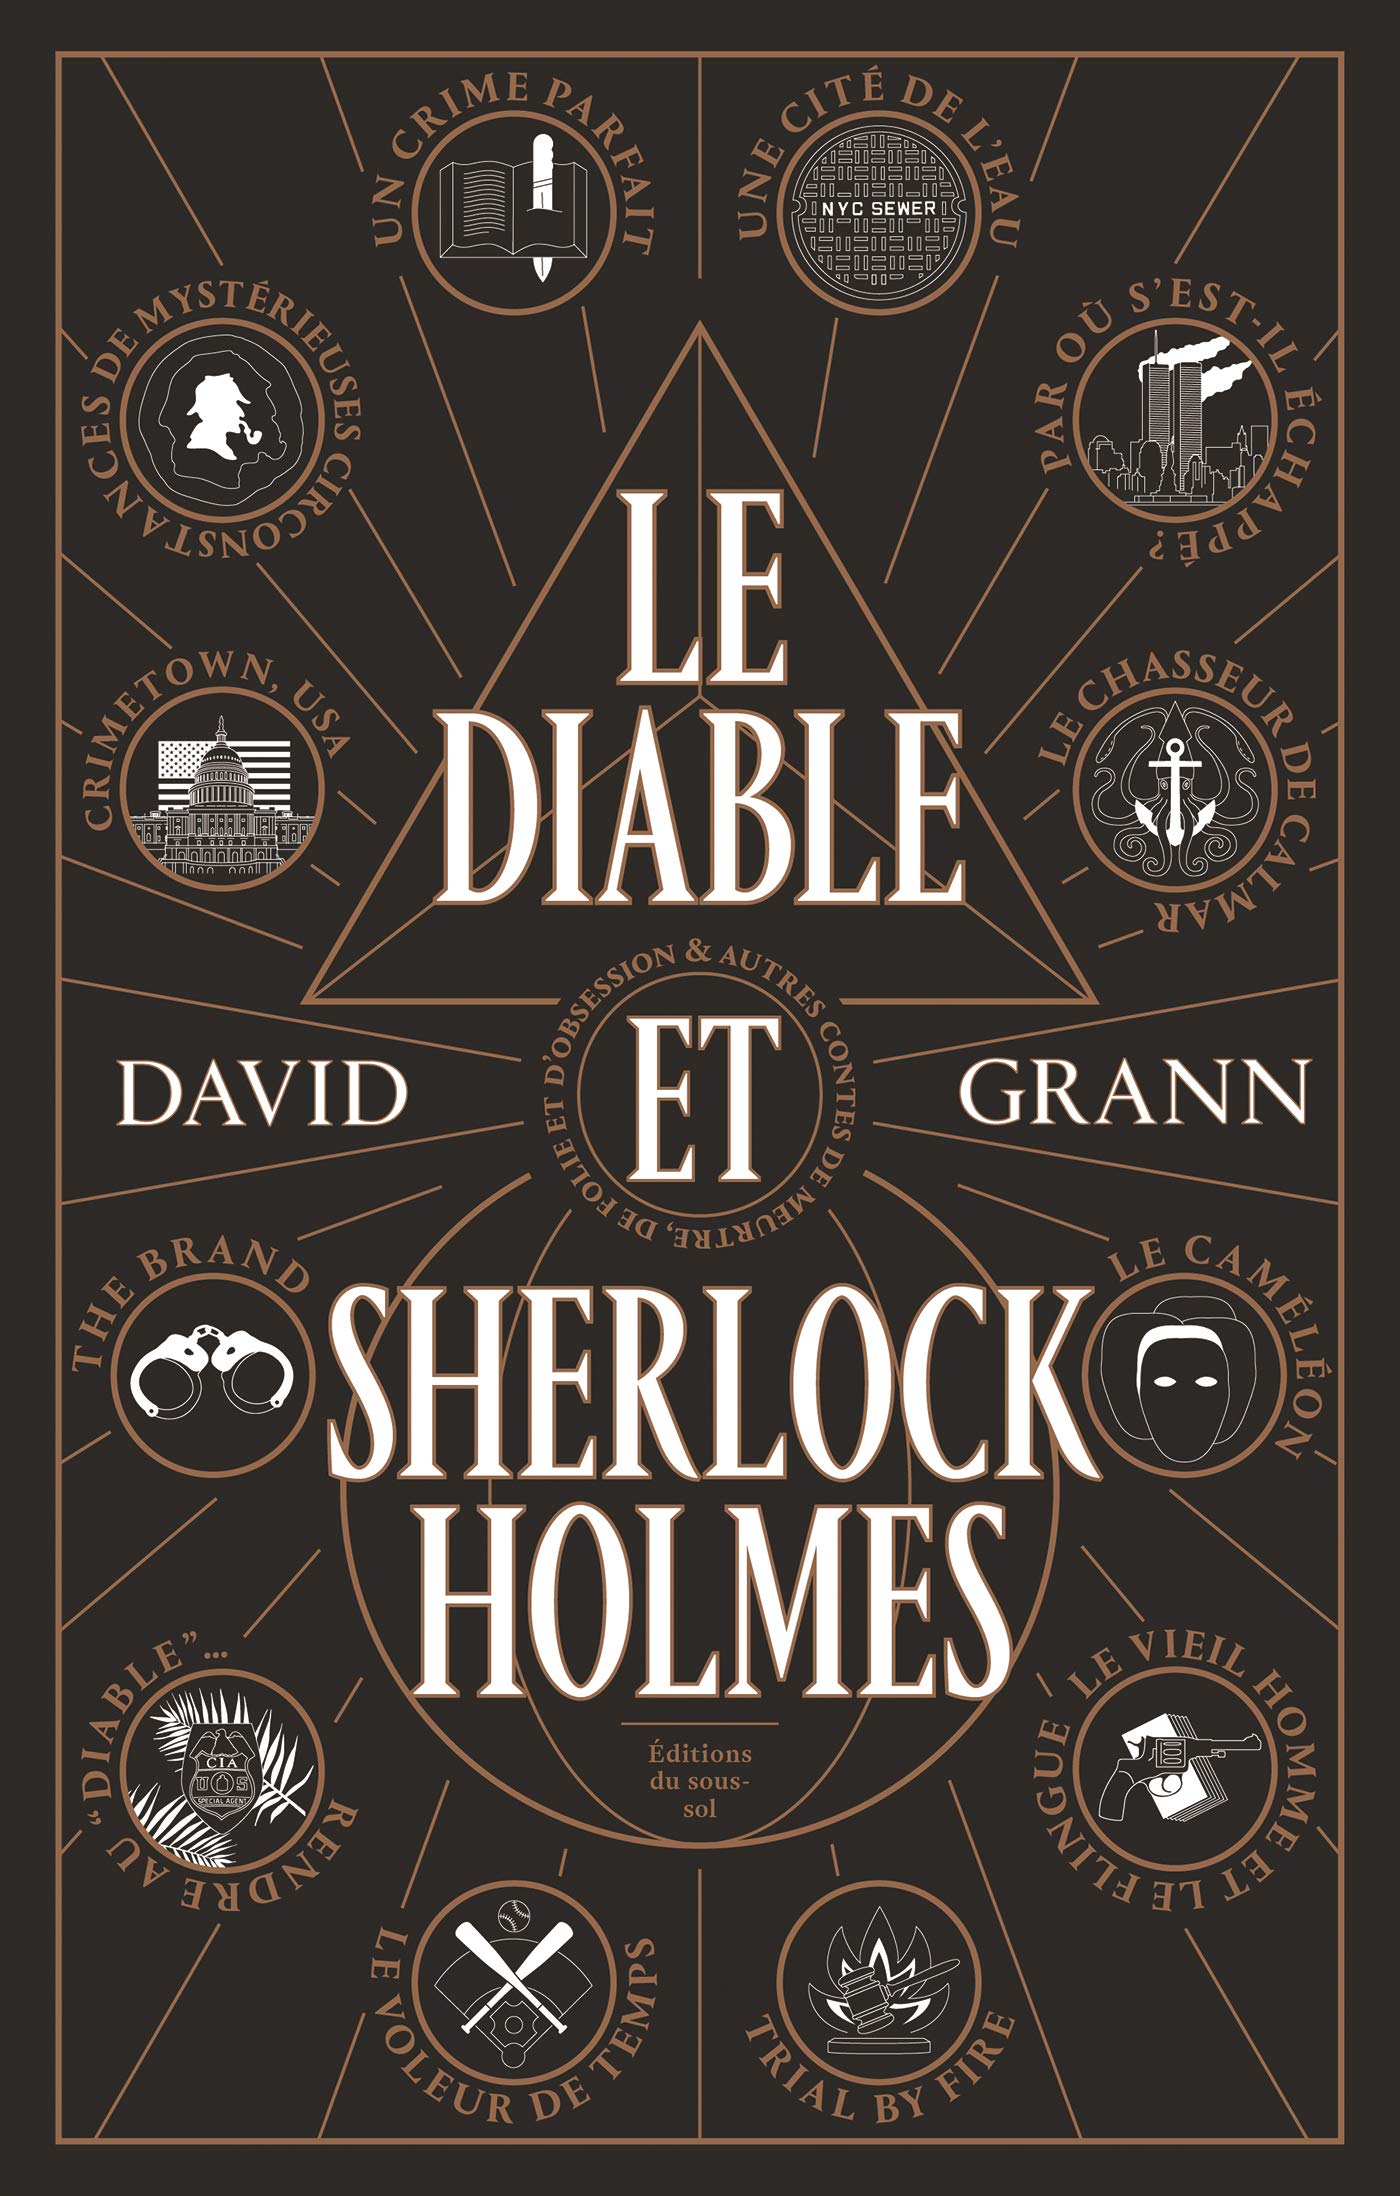 Le Diable et Sherlock Holmes (French Edition)